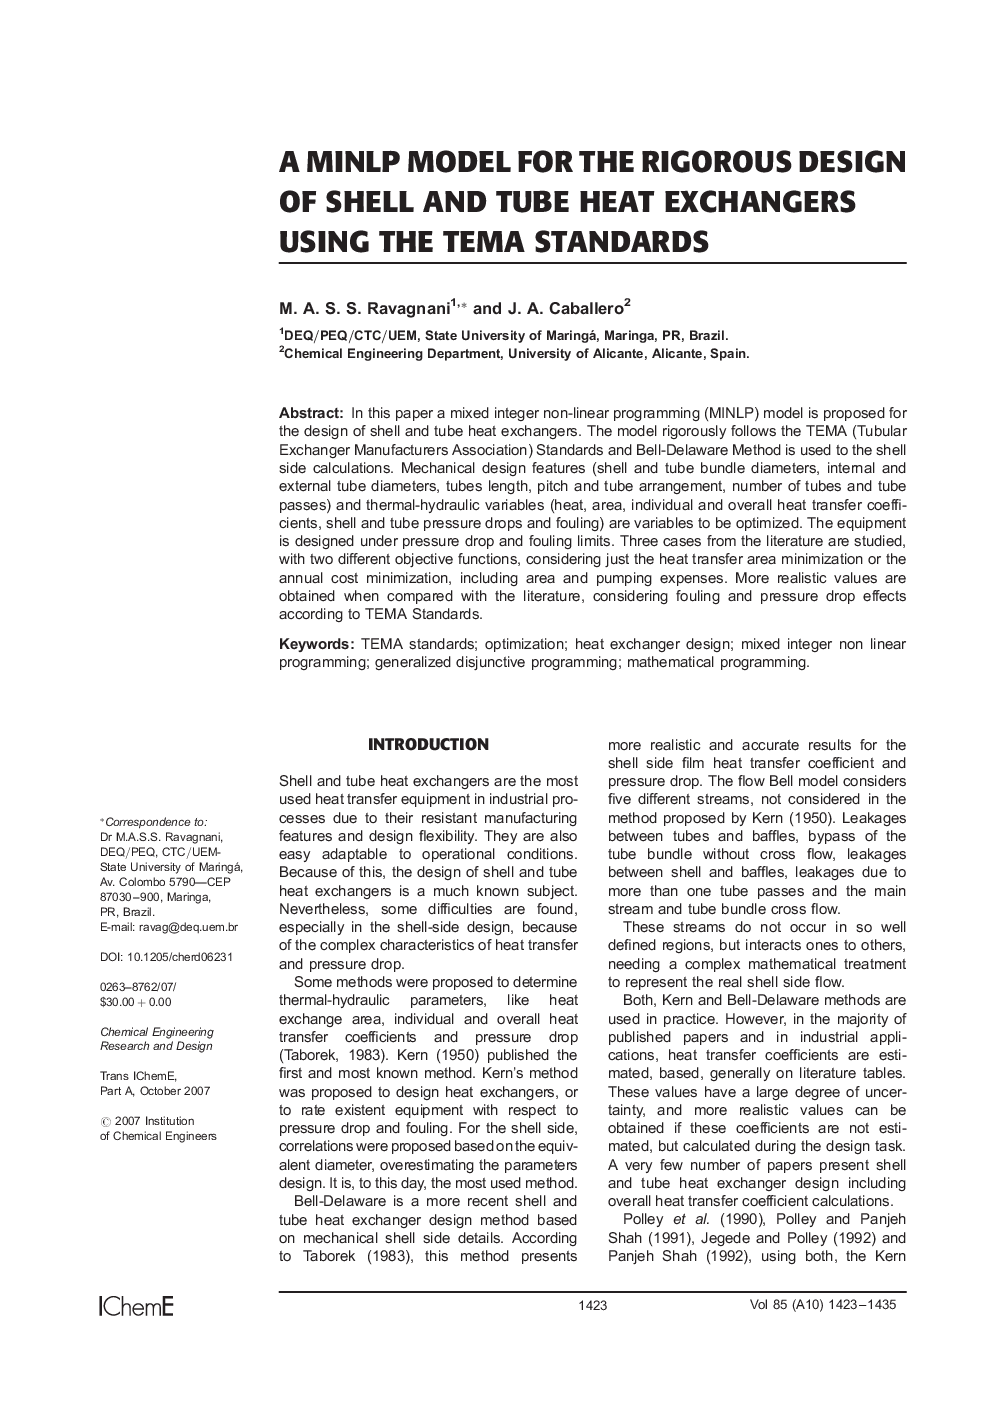 A MINLP Model for the Rigorous Design of Shell and Tube Heat Exchangers Using the Tema Standards